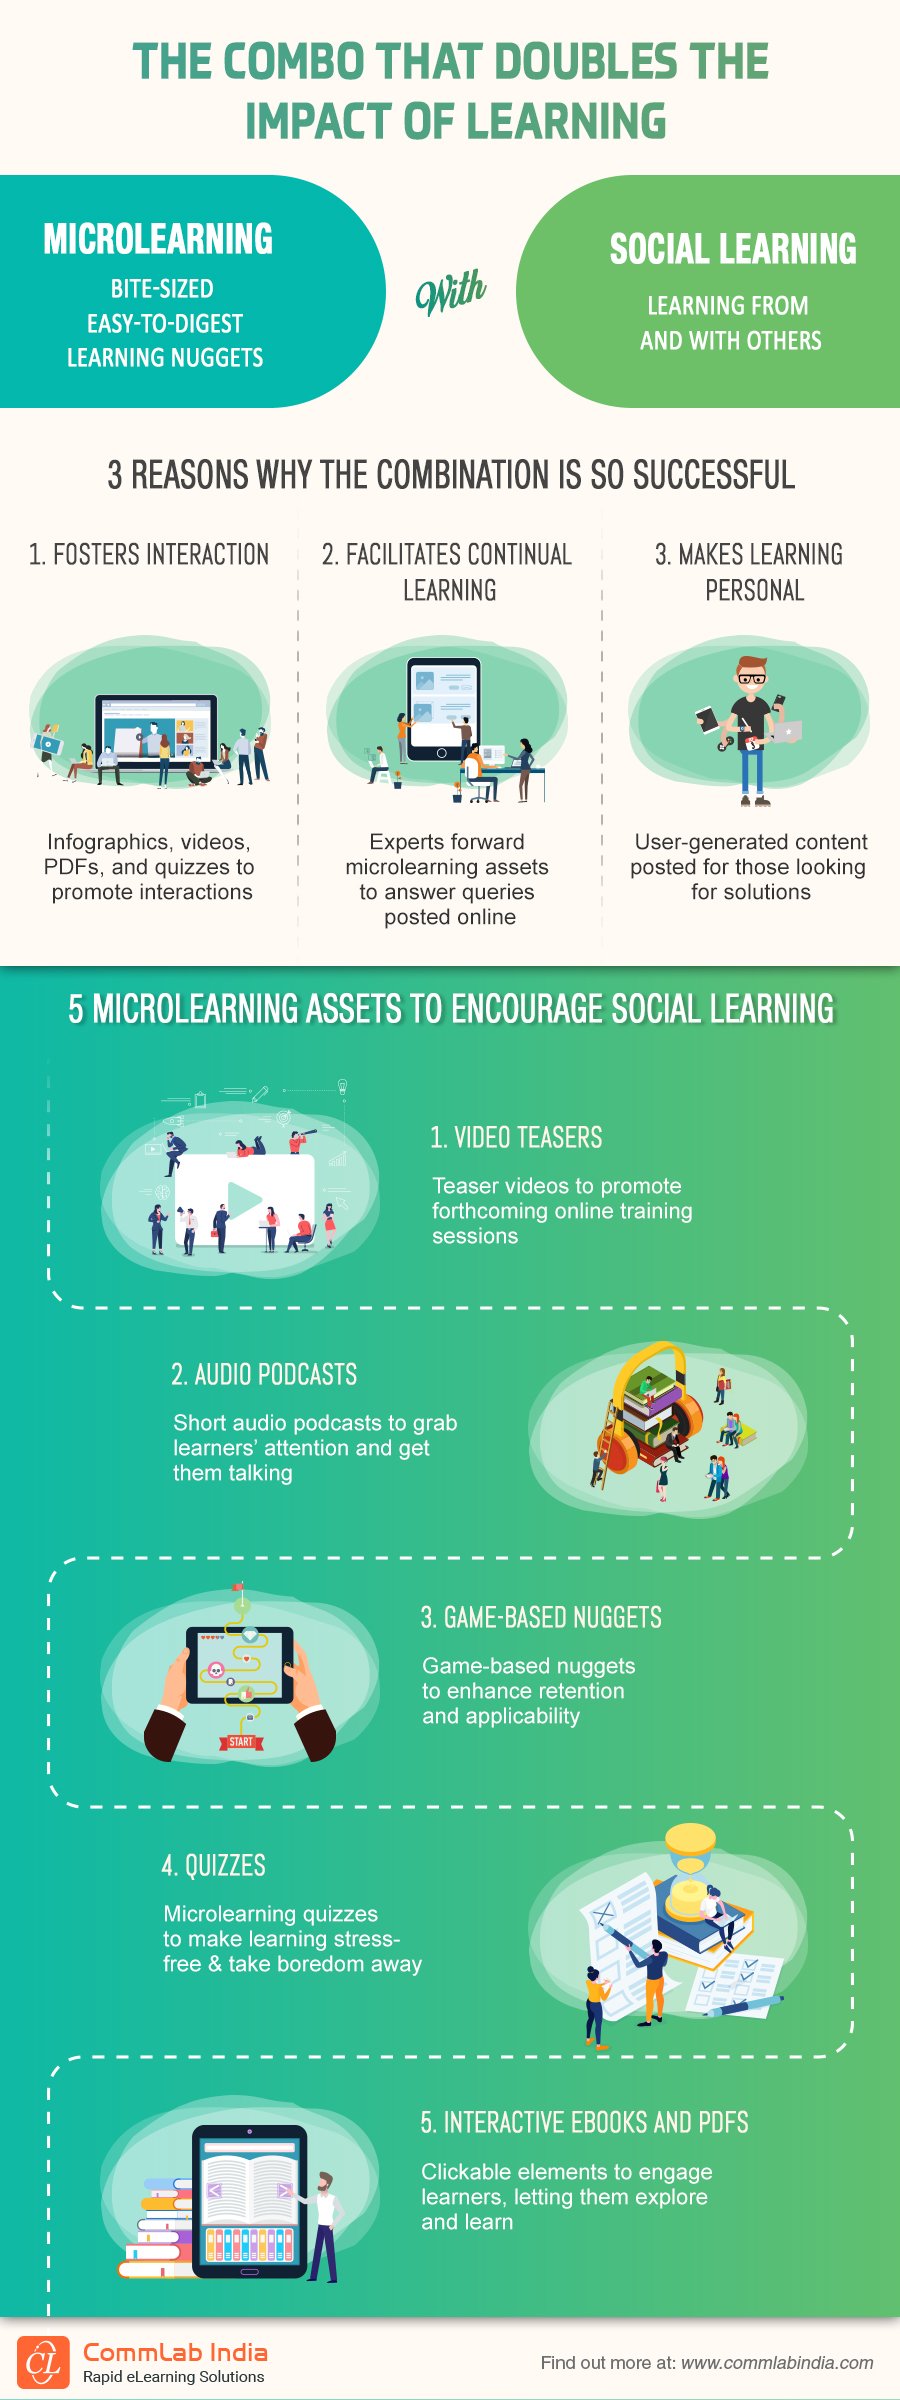 Microlearning + Social Learning: Doubling the Impact of Learning [Infographic]